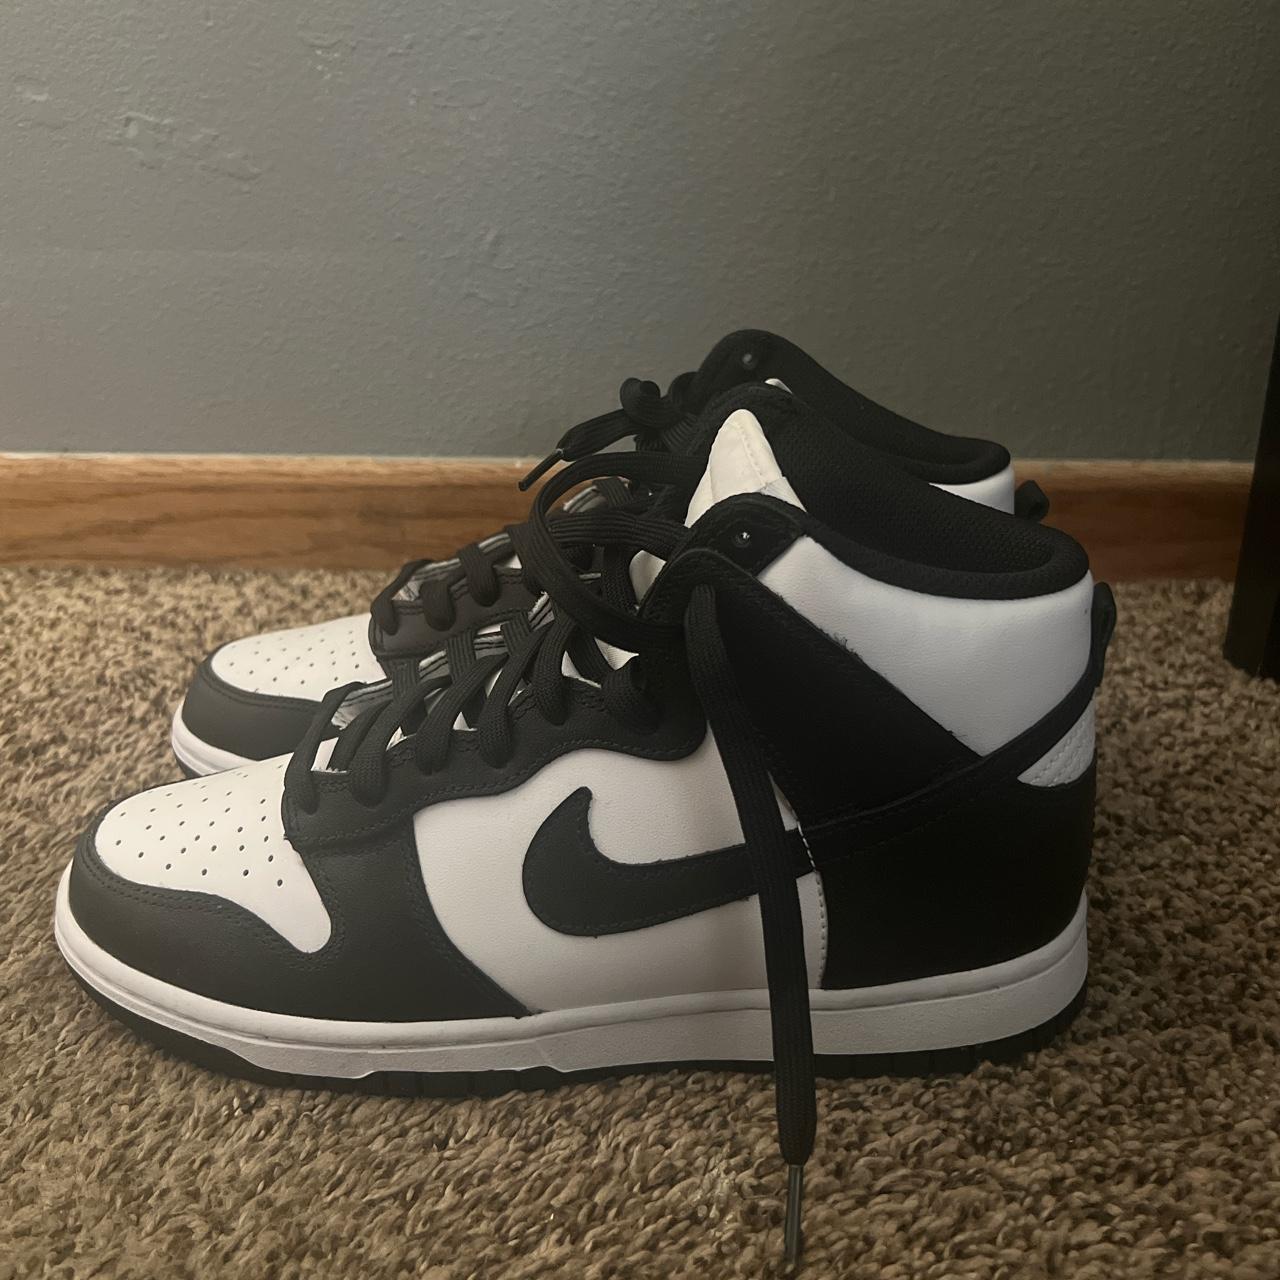 Dunk high ‘Black White’ US M 7.5 Worn once or twice... - Depop